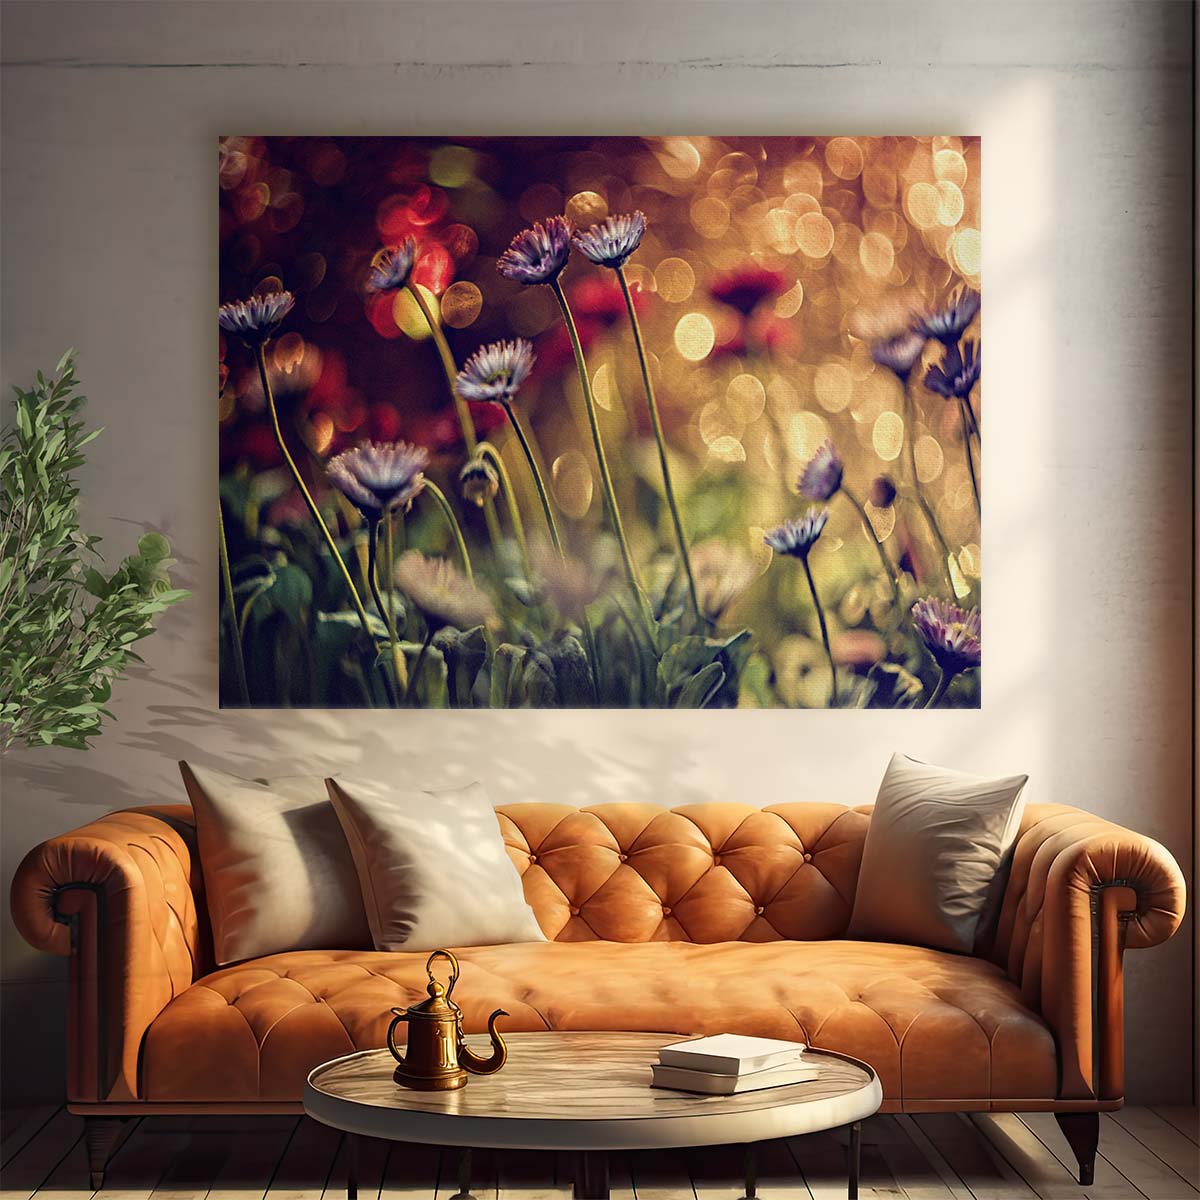 Colorful Summer Garden Macro Floral Wall Art by Luxuriance Designs. Made in USA.